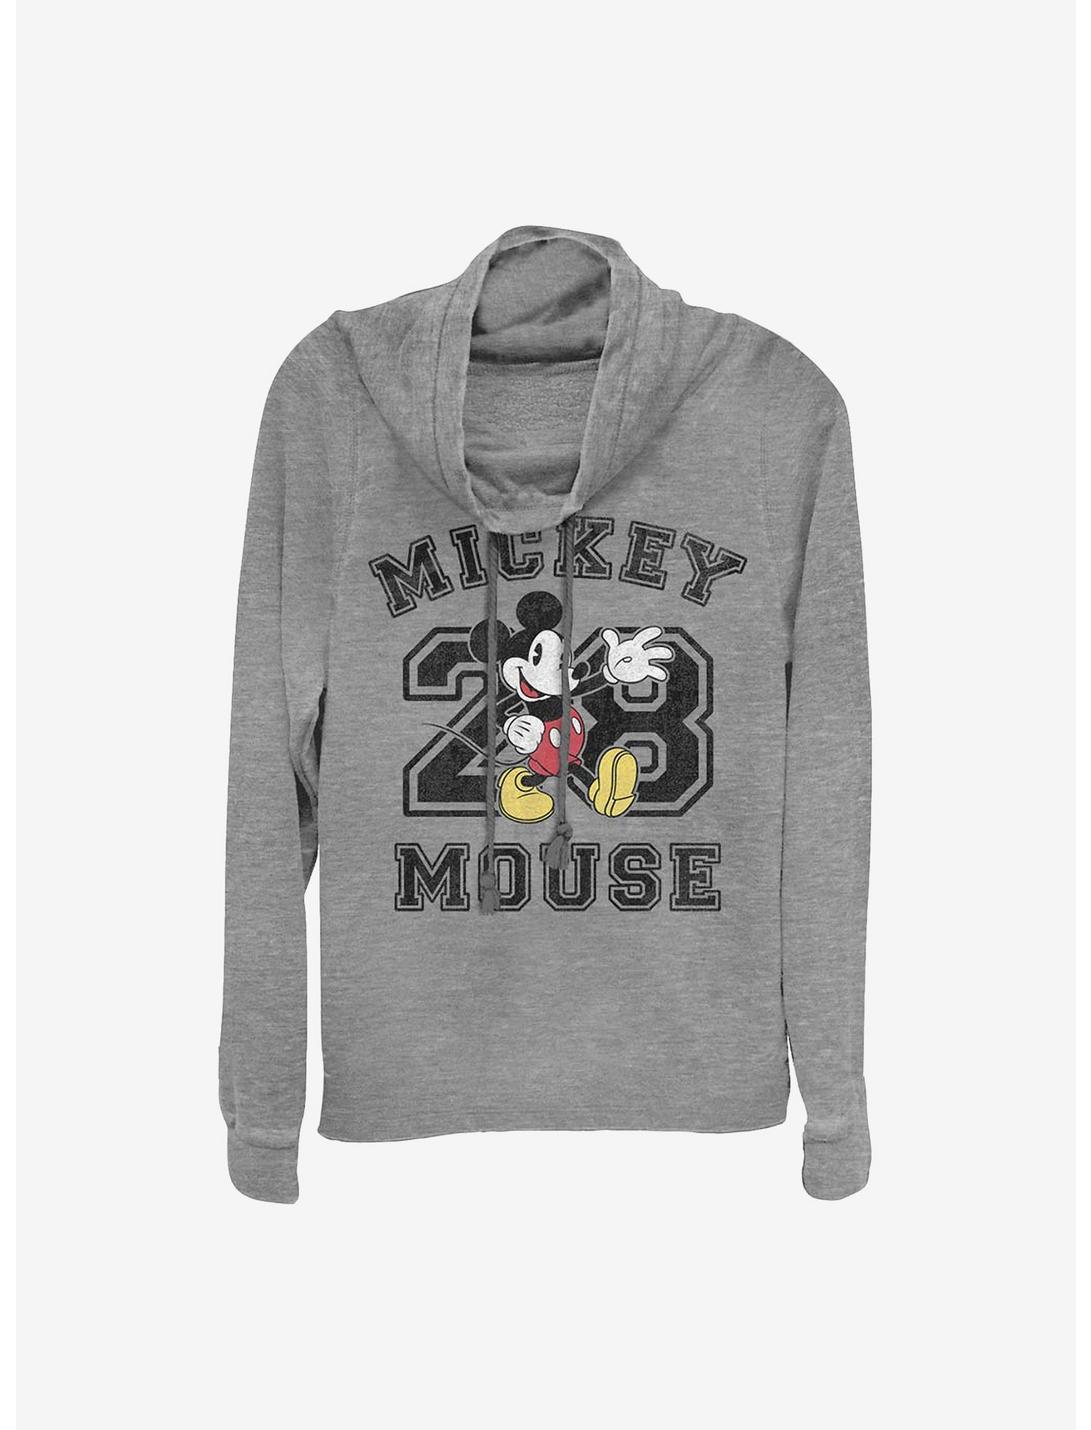 Disney Mickey Mouse Collegiate Cowlneck Long-Sleeve Girls Top, GRAY HTR, hi-res